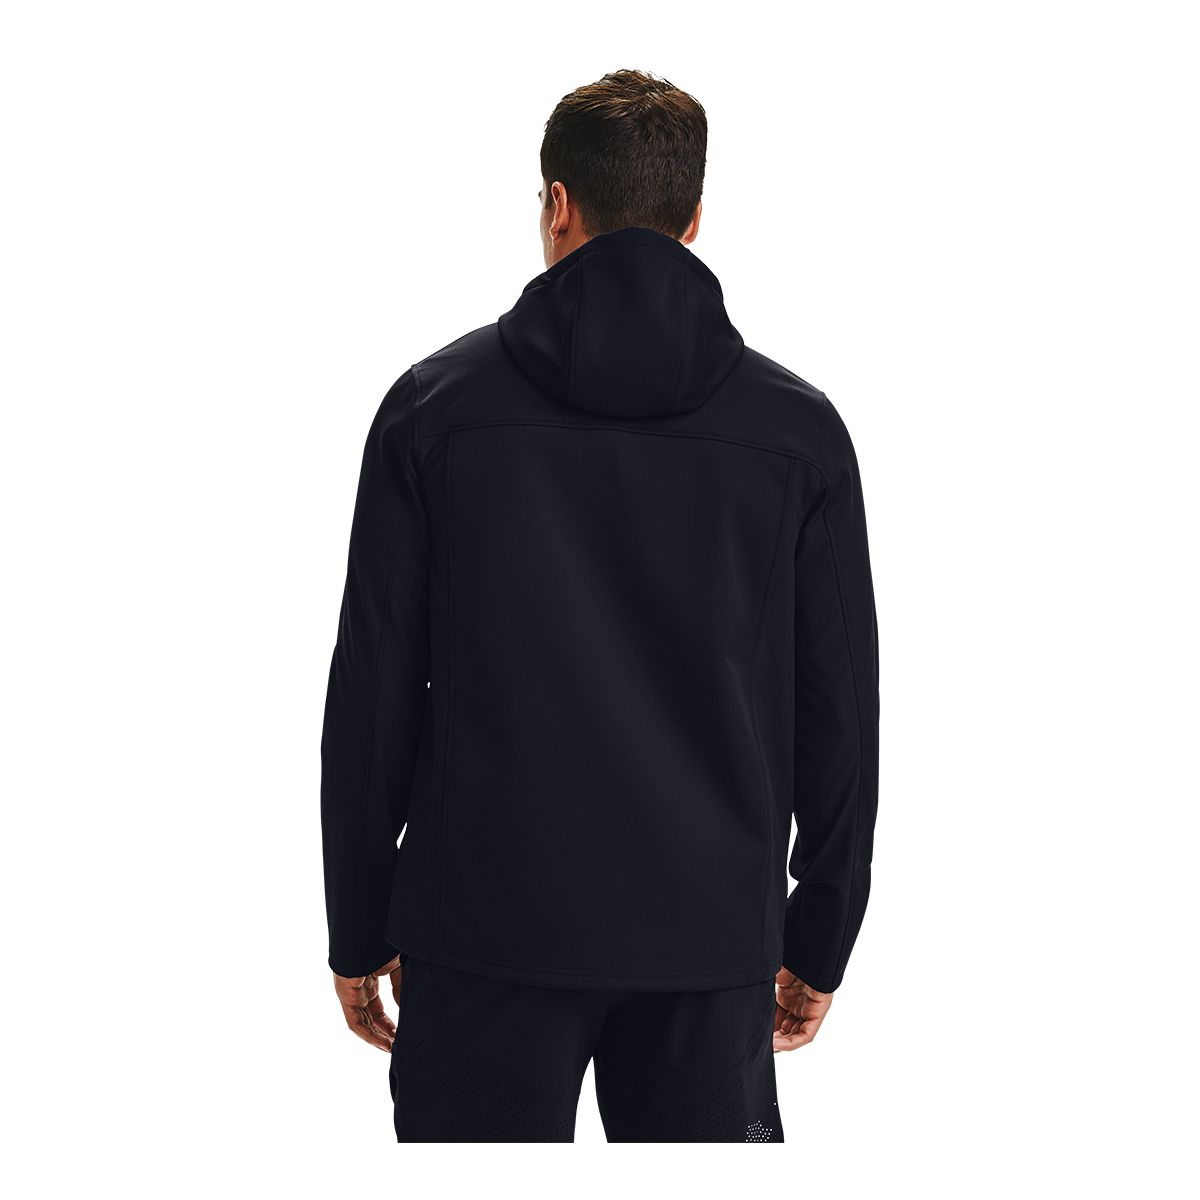 Under Armour Men's ColdGear Infrared Shield Hooded Full-Zip Jacket -  ShopStyle